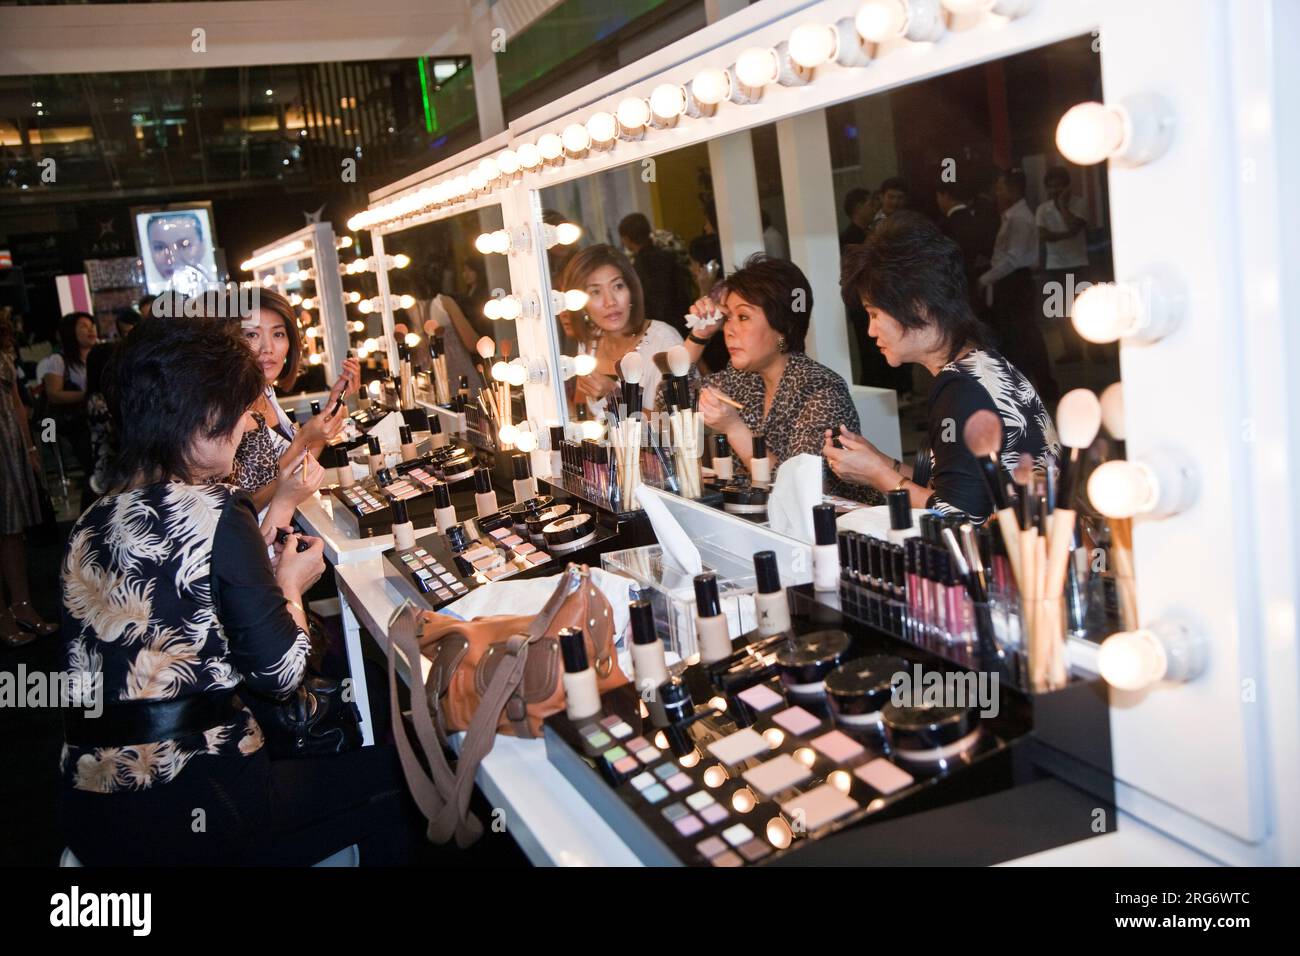 BANGKOK, THAILAND - May 11: cosmetic company AMWAY sponsores a makeup course with its products in the central world center and assists woman in using Stock Photo